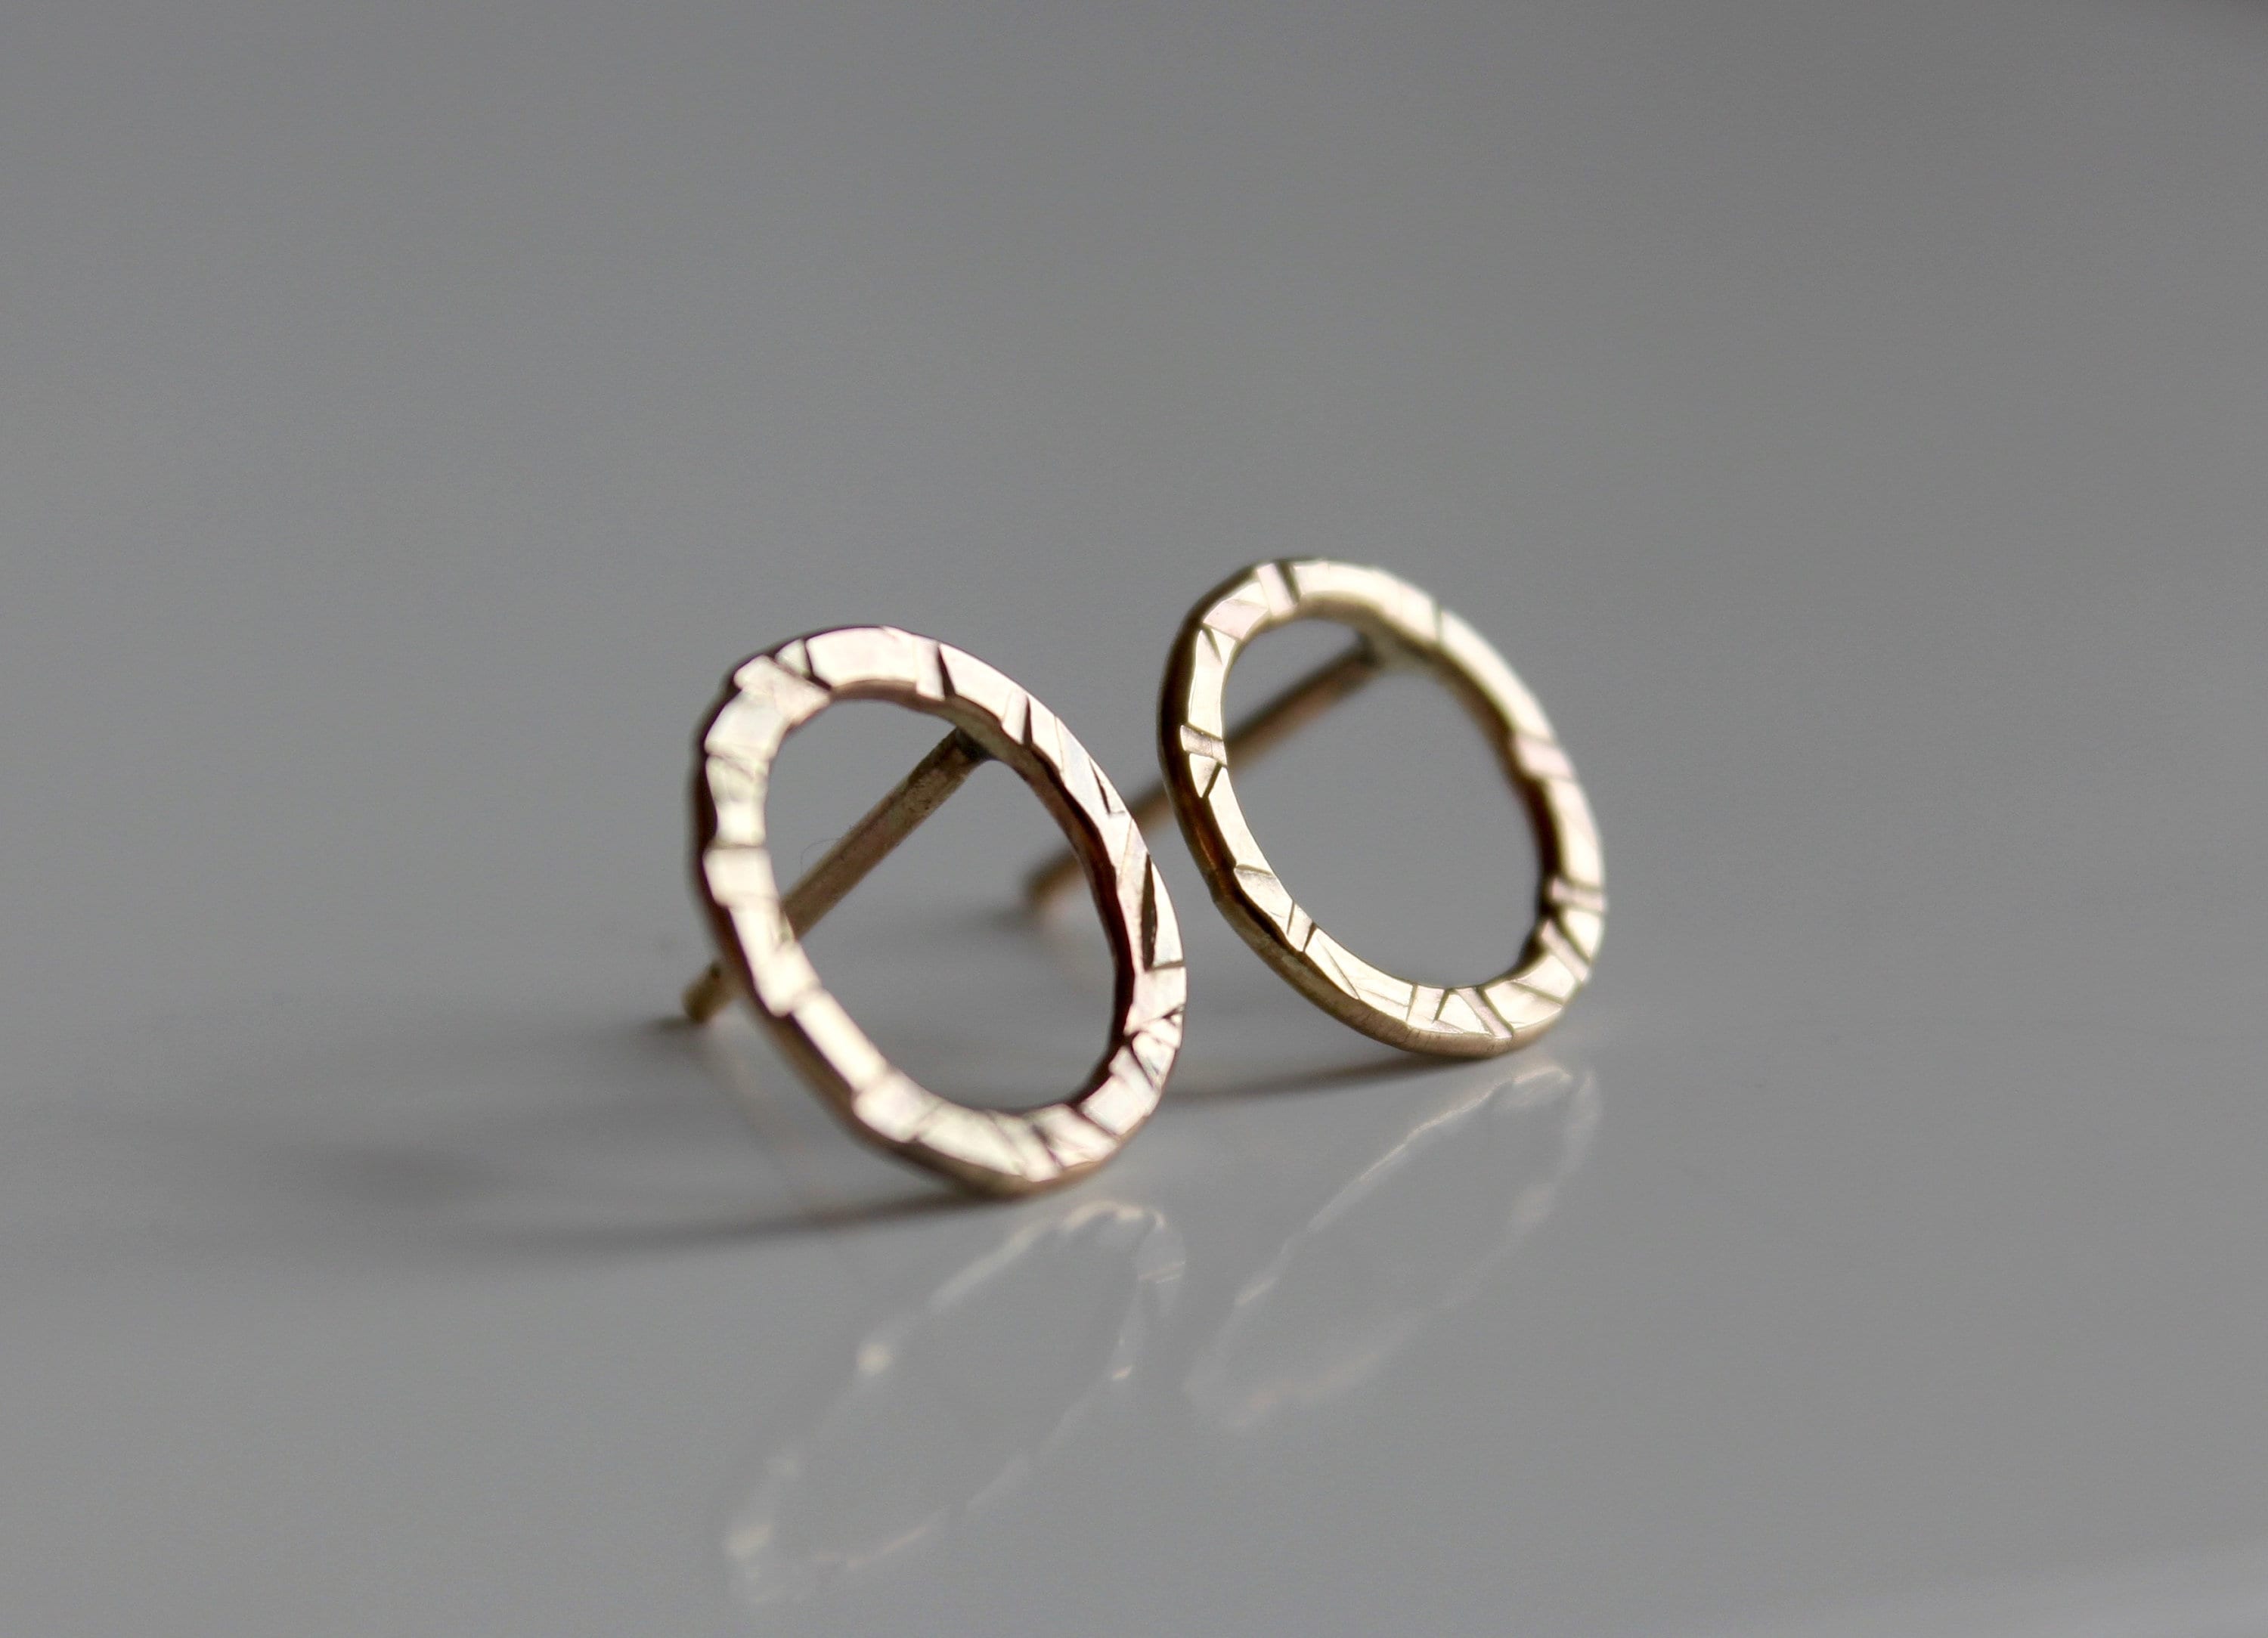 Gold Stud Earrings - Circle Small Circle Studs Hammered Textured Earrings, Jewellery UK